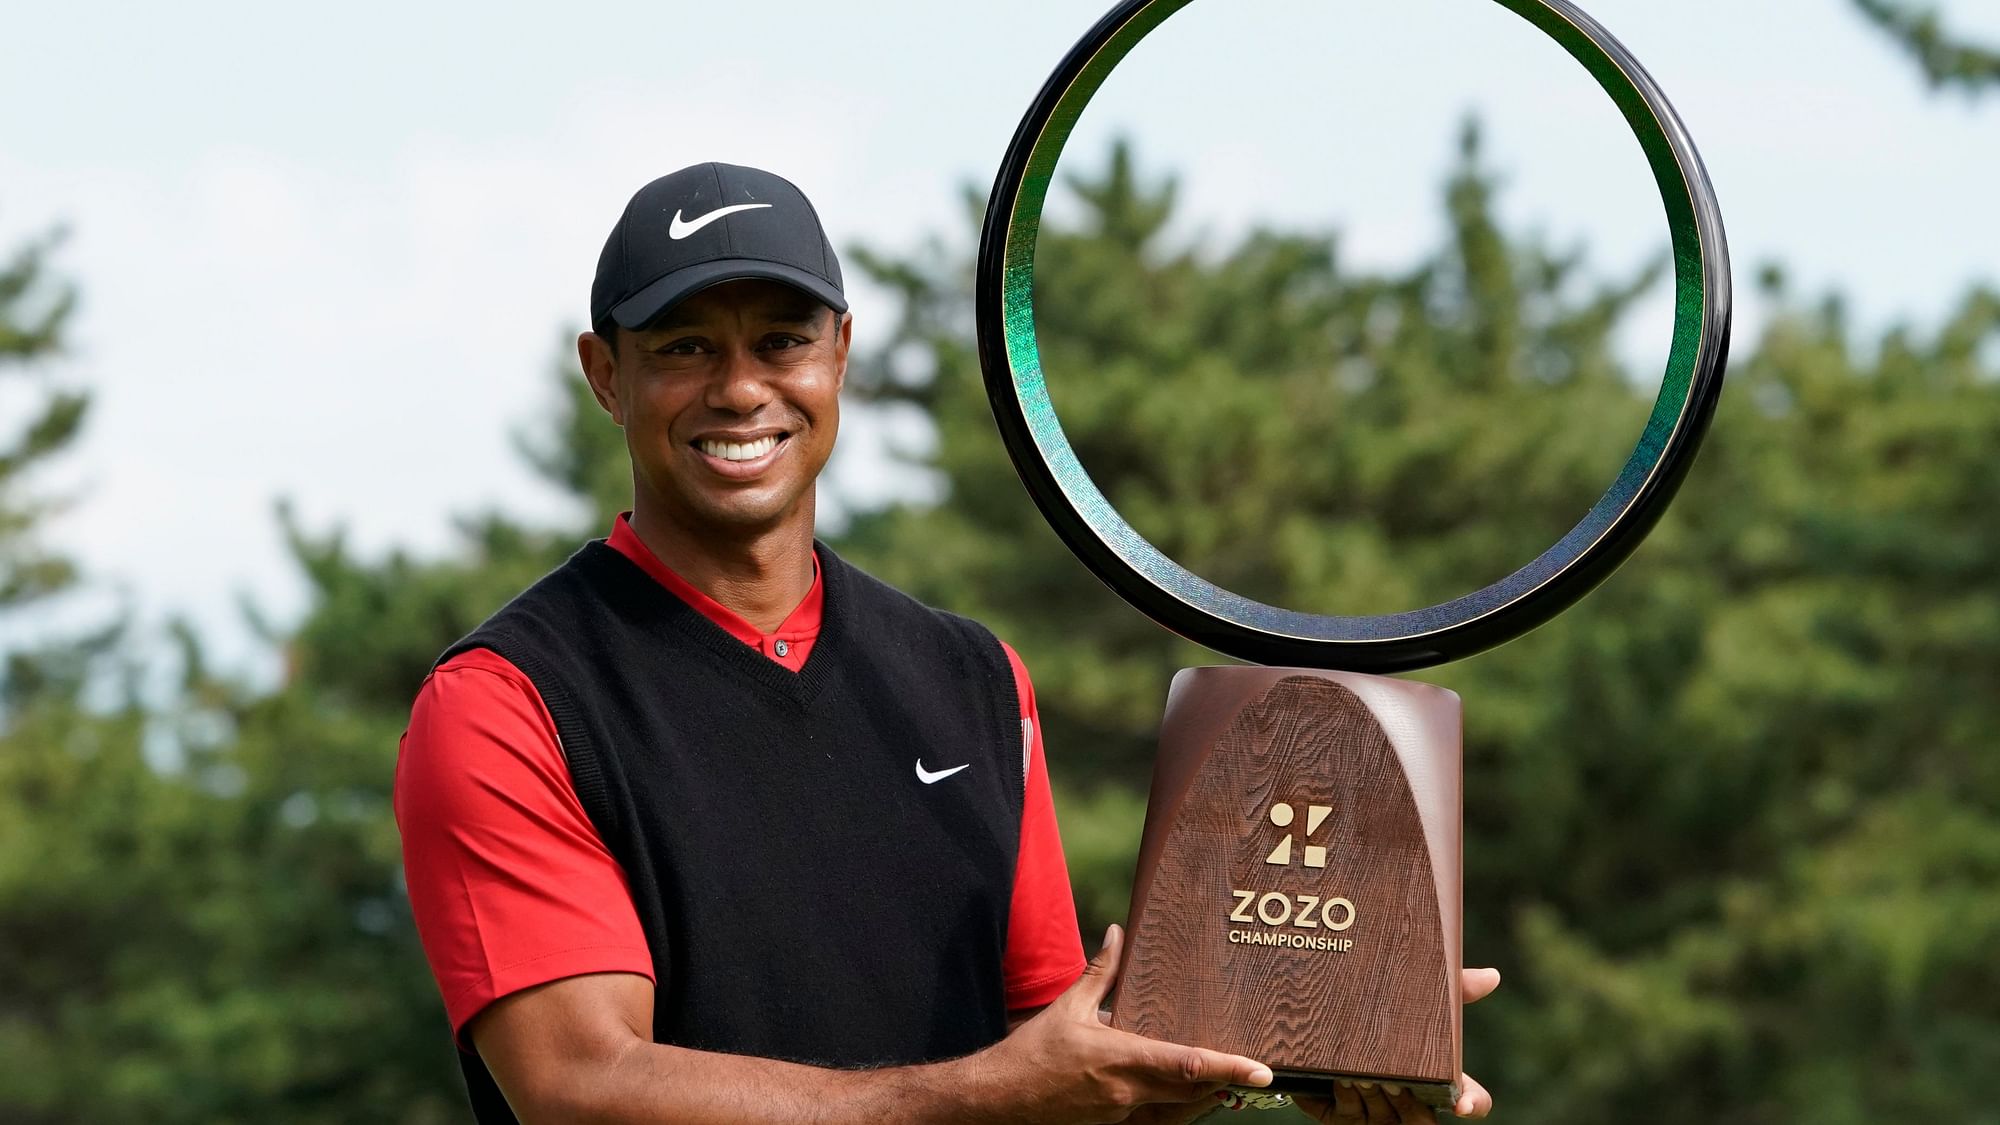 Tiger Woods with his trophy after winning the Zozo Championship PGA Tour at the Accordia Golf Narashino country club in Inzai, east of Tokyo, Japan, Monday, Oct. 28.